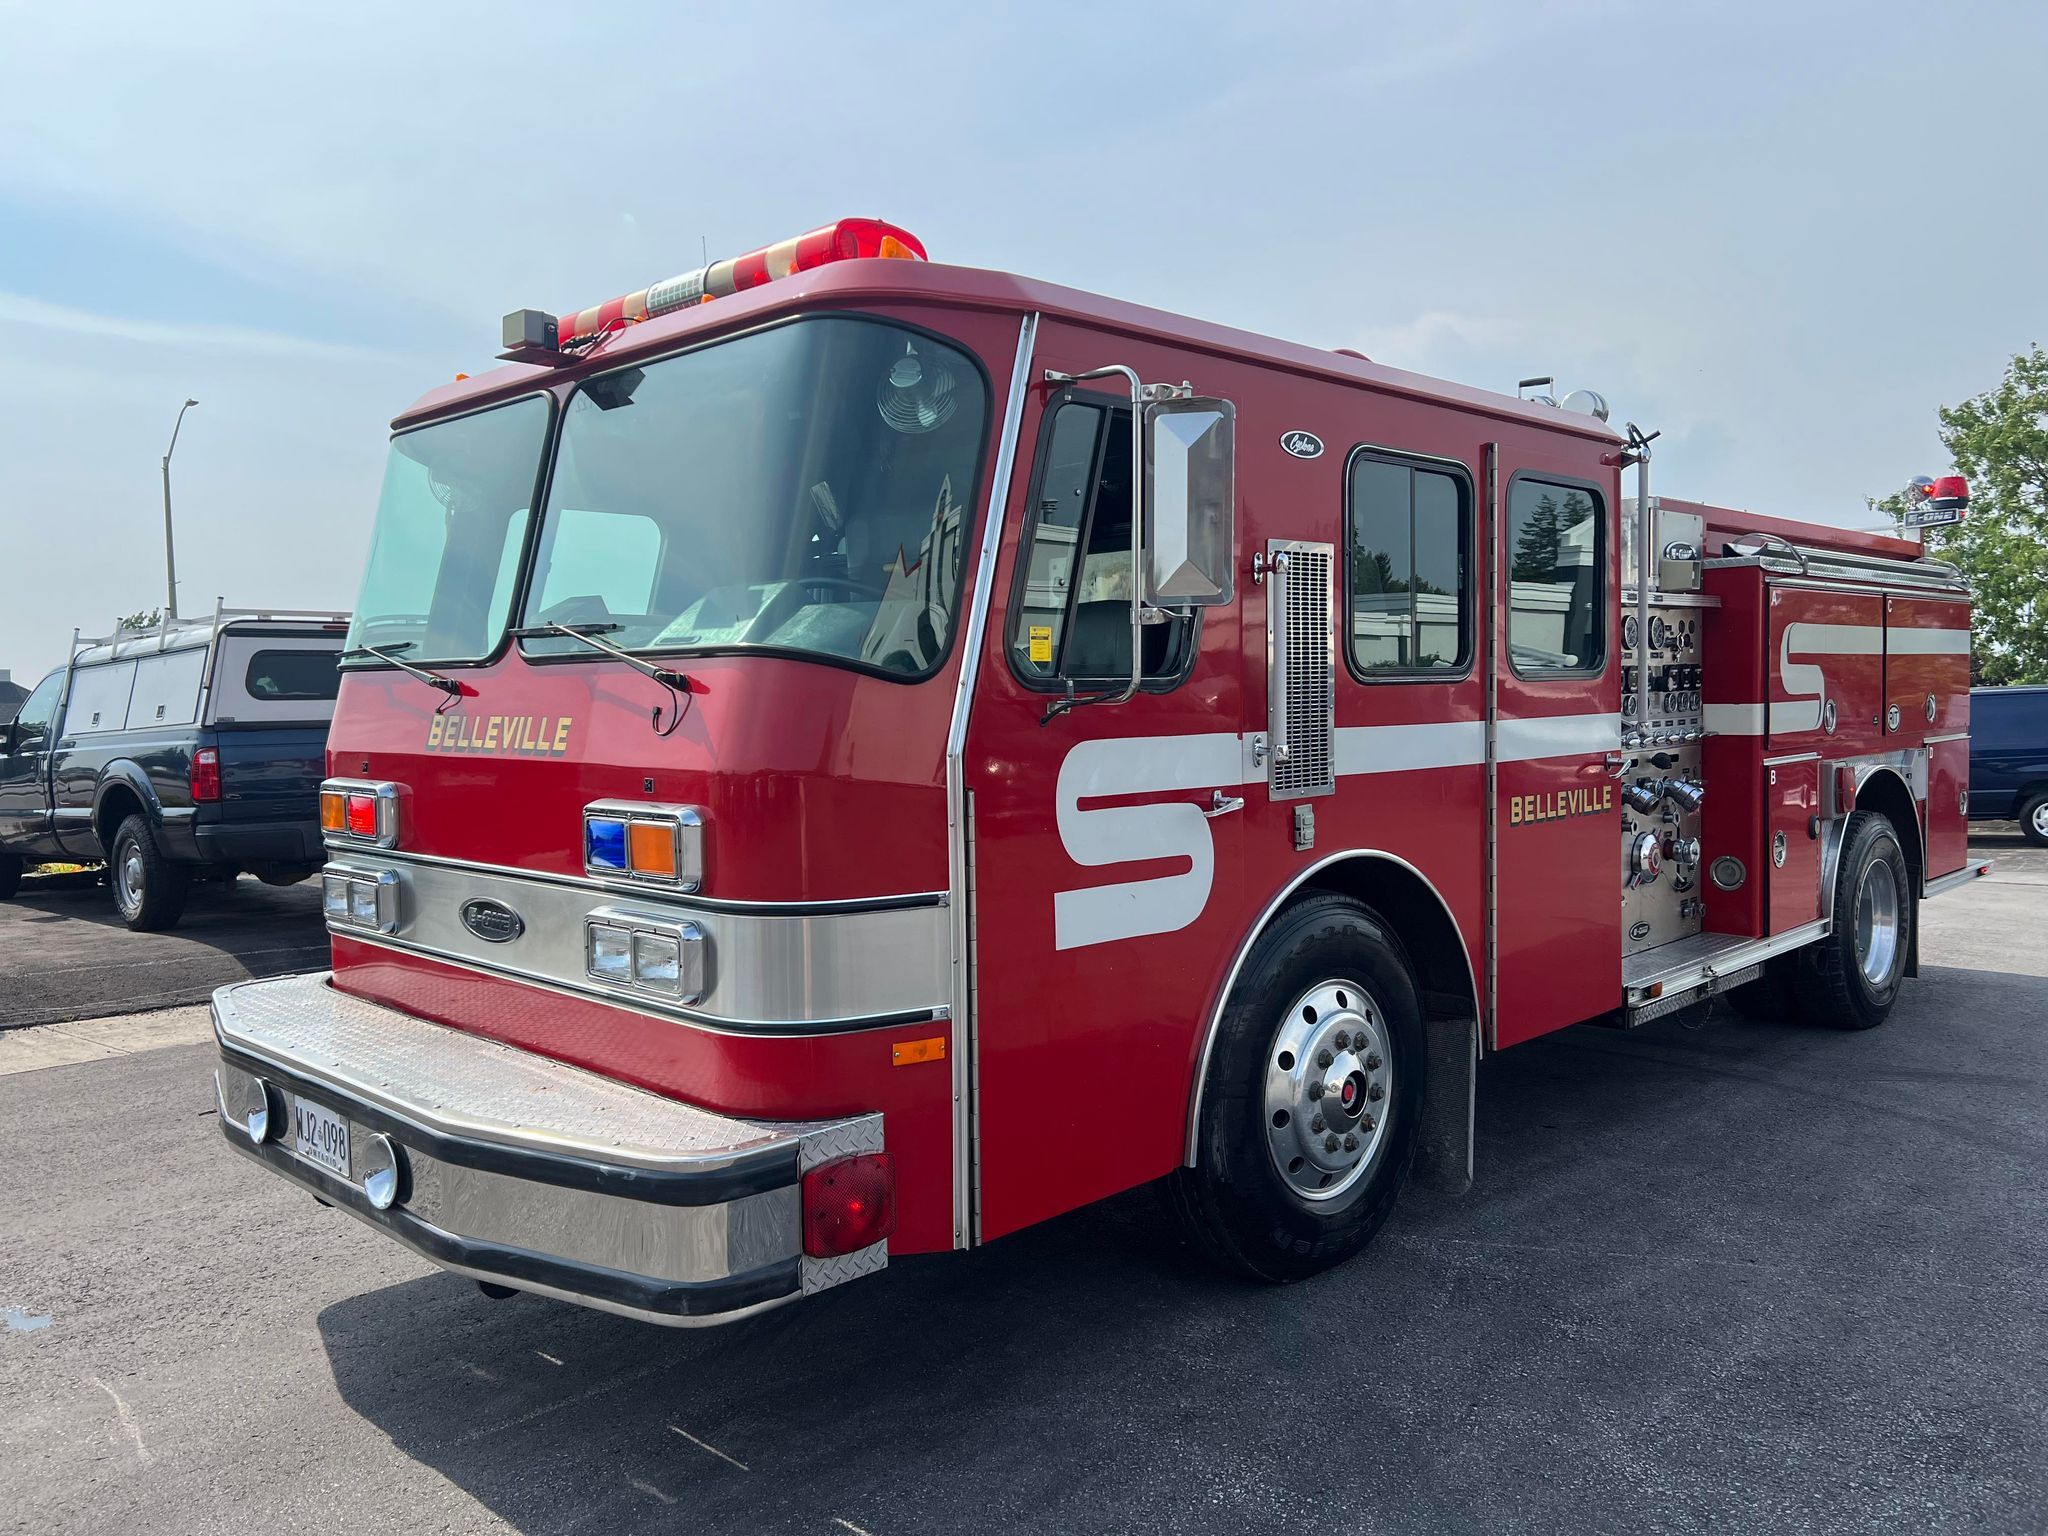 1991 E-One Fire Truck Just Reduced to $19,995